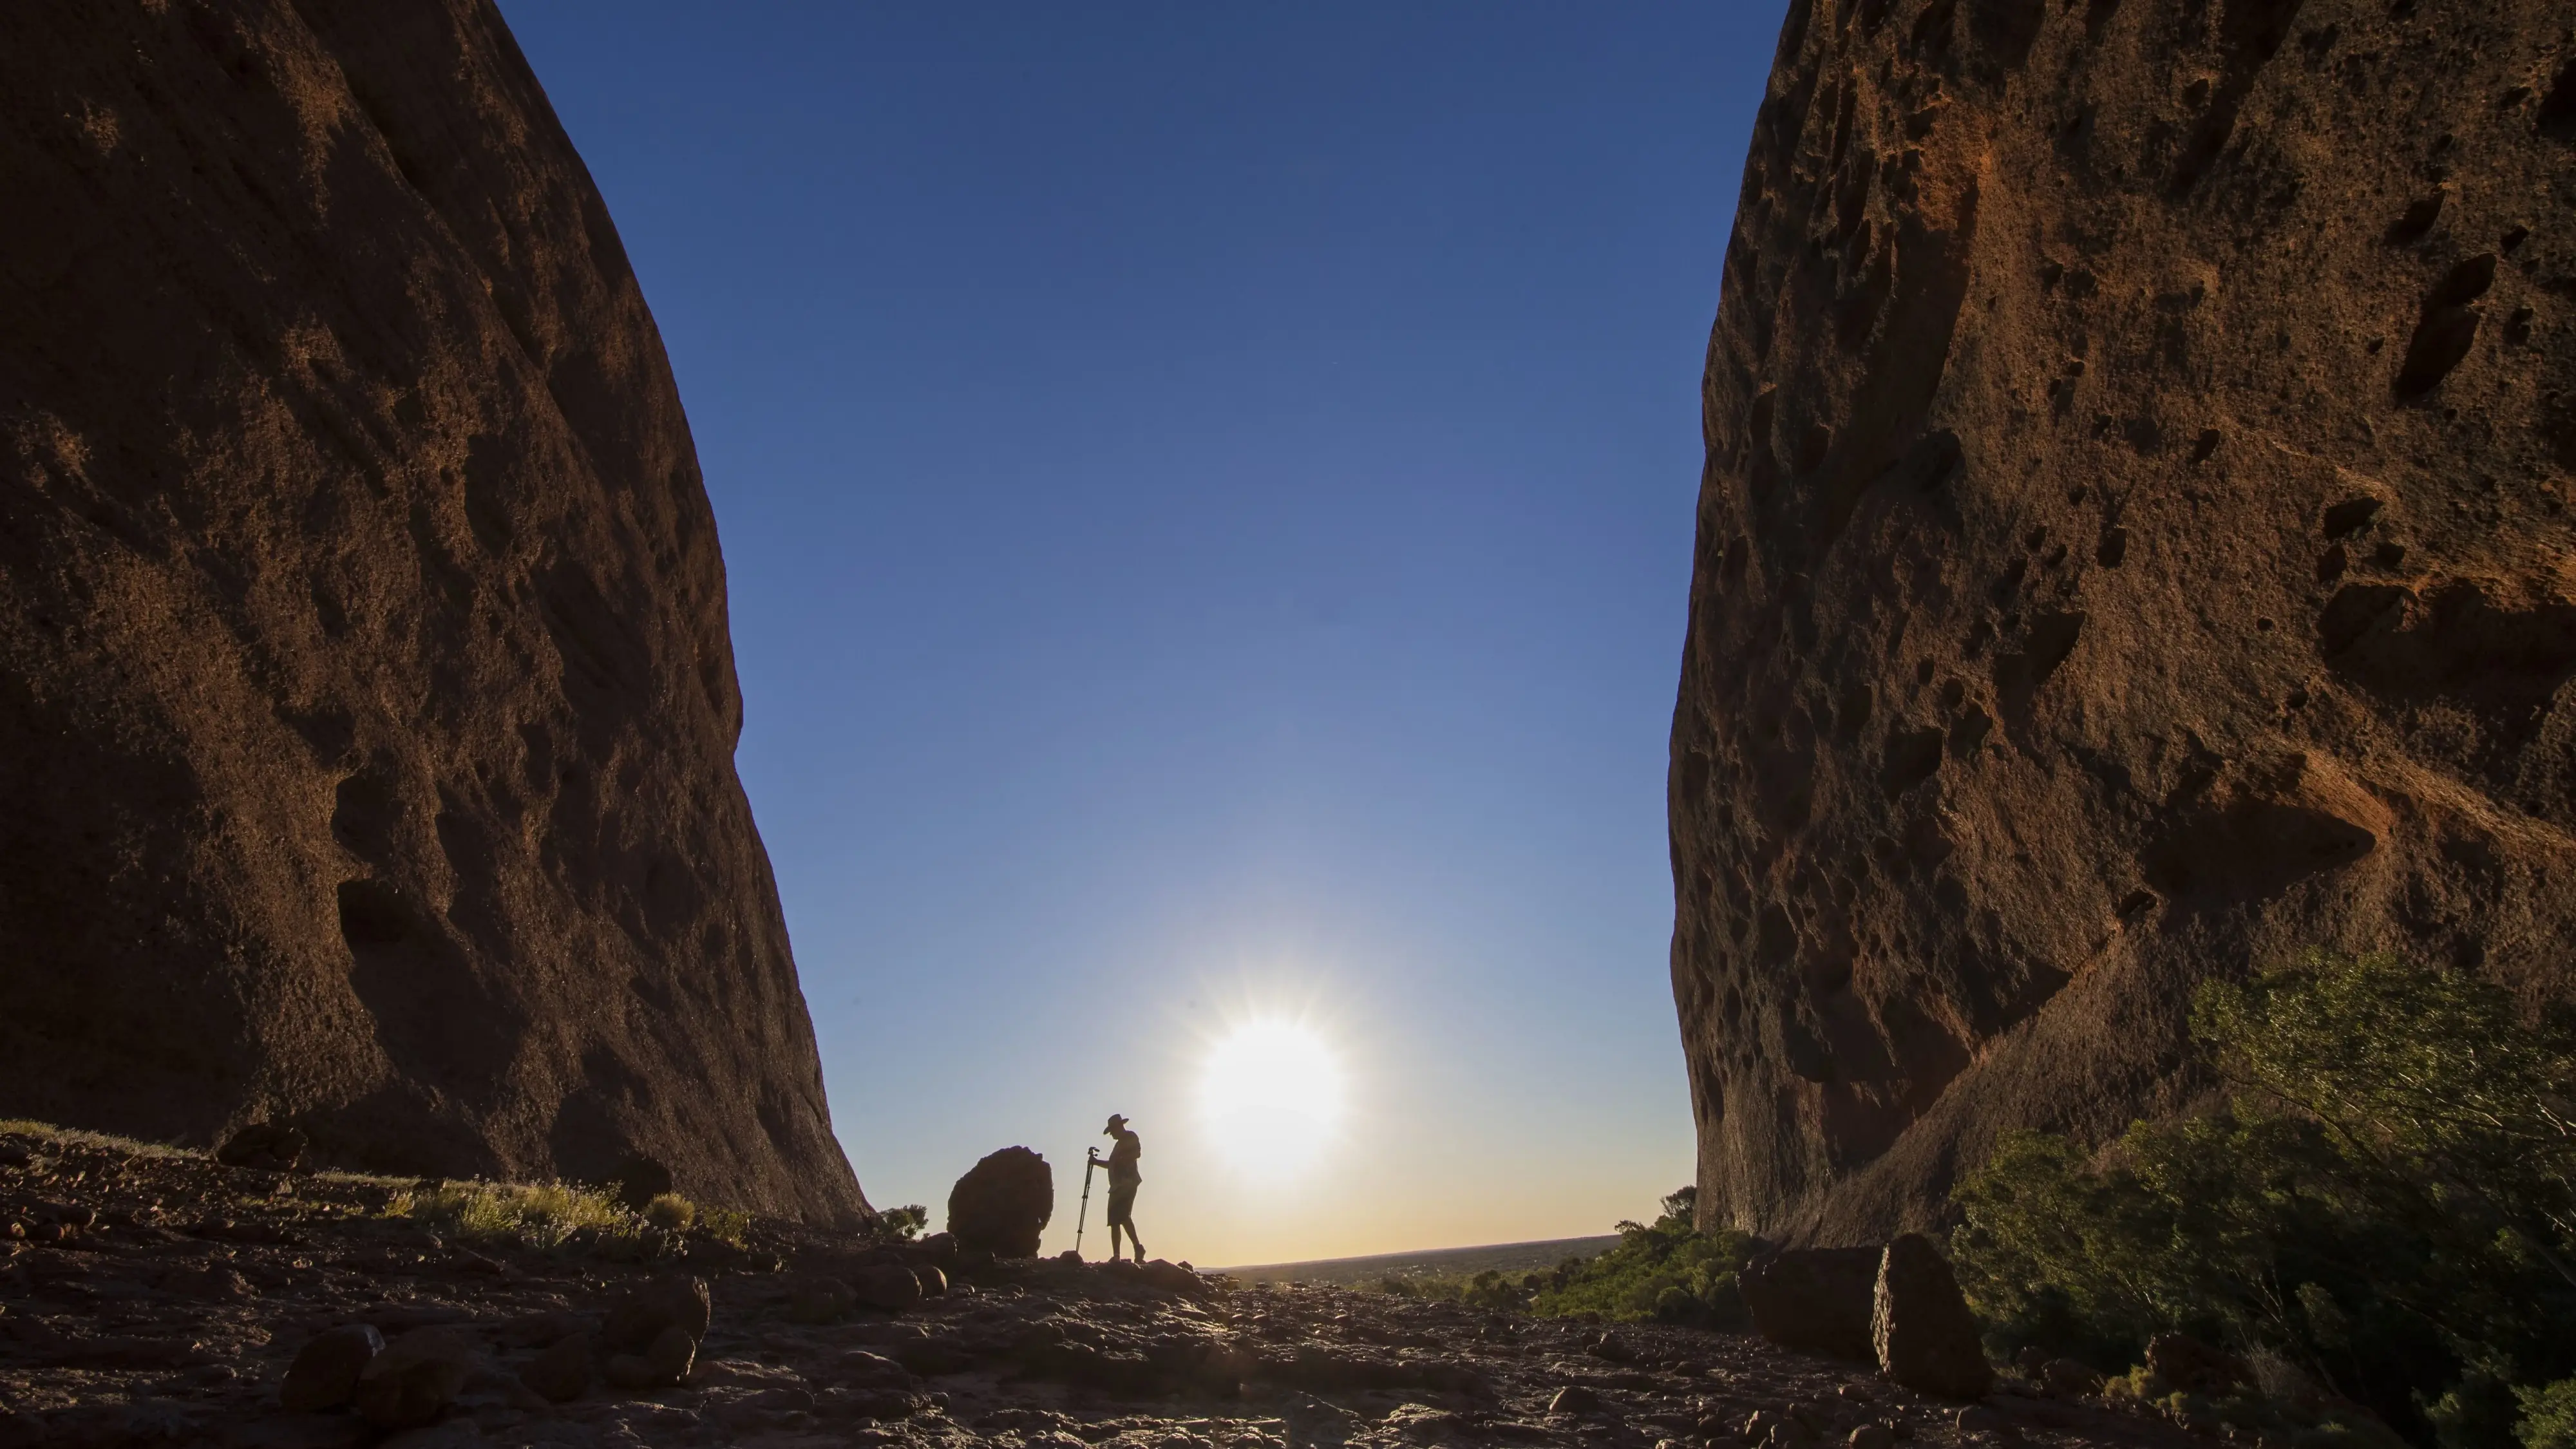 Silhouette of a hiker at sunrise in between two enormous rock formations at Kata Tjuta. Image credit: Tourism NT/Sean Scott